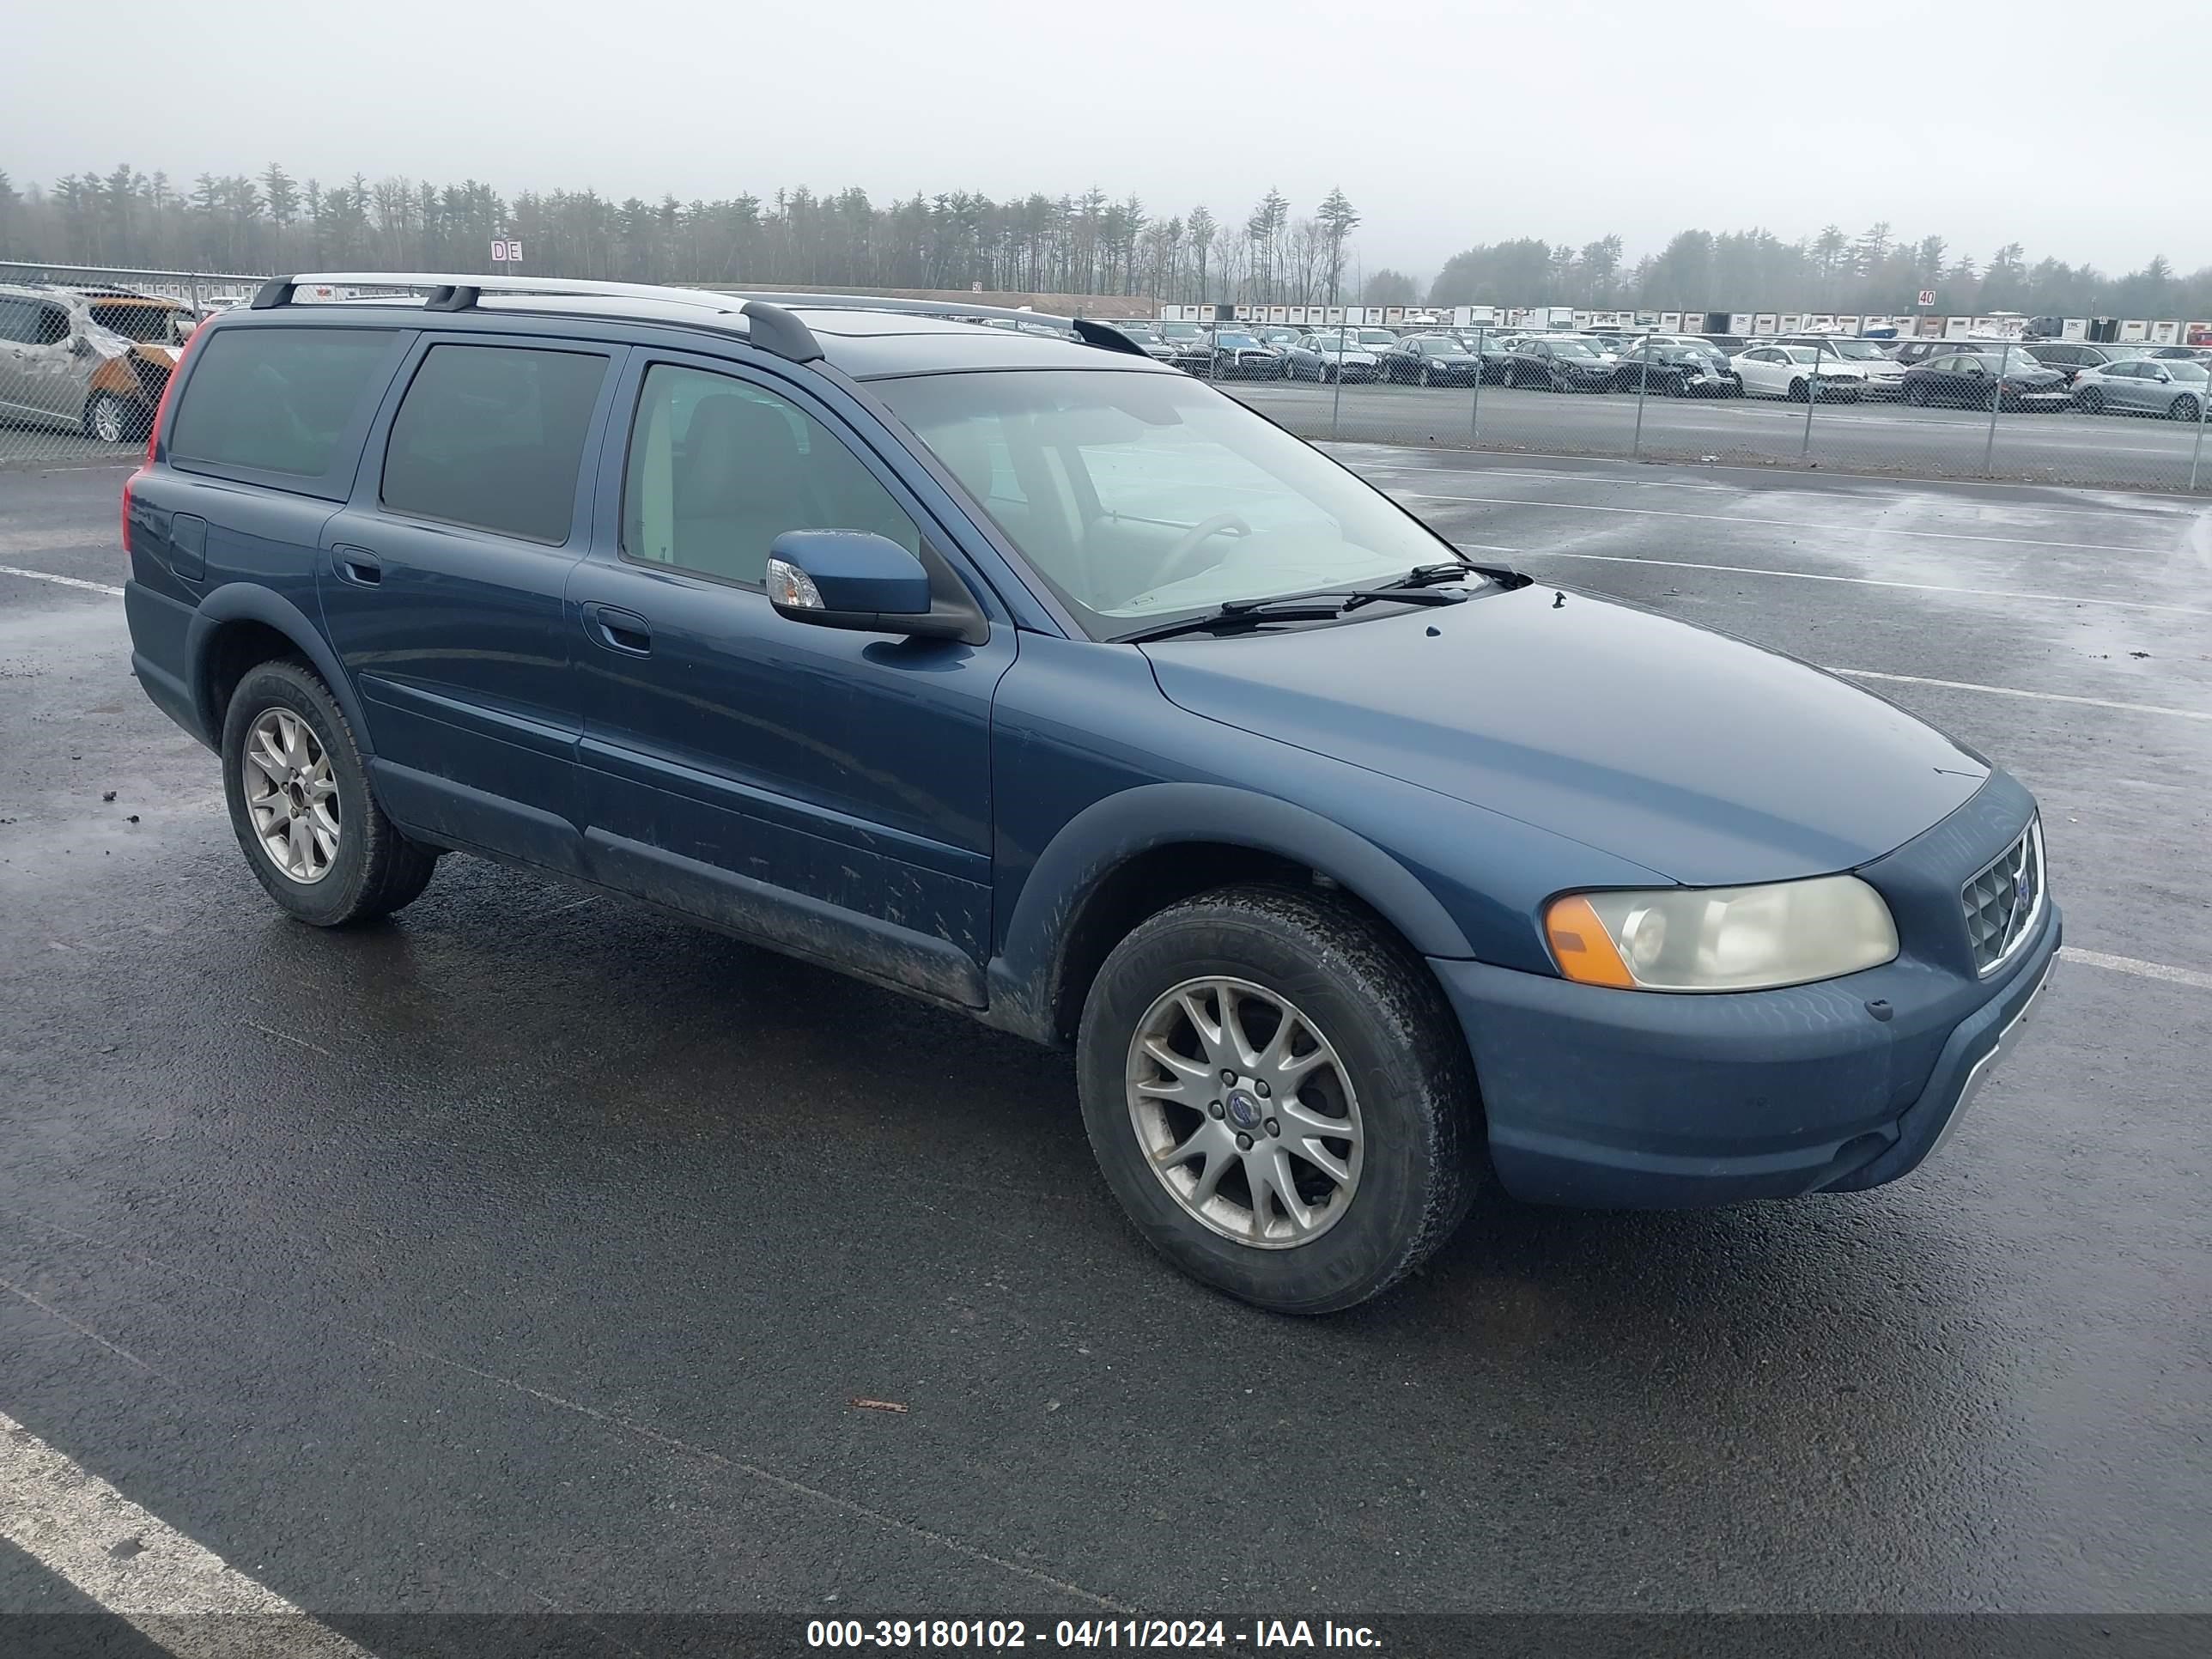 vin: YV4SZ592971257188 YV4SZ592971257188 2007 volvo xc70 2500 for Sale in 12701, 65 Kaufman Rd, Monticello, New York, USA